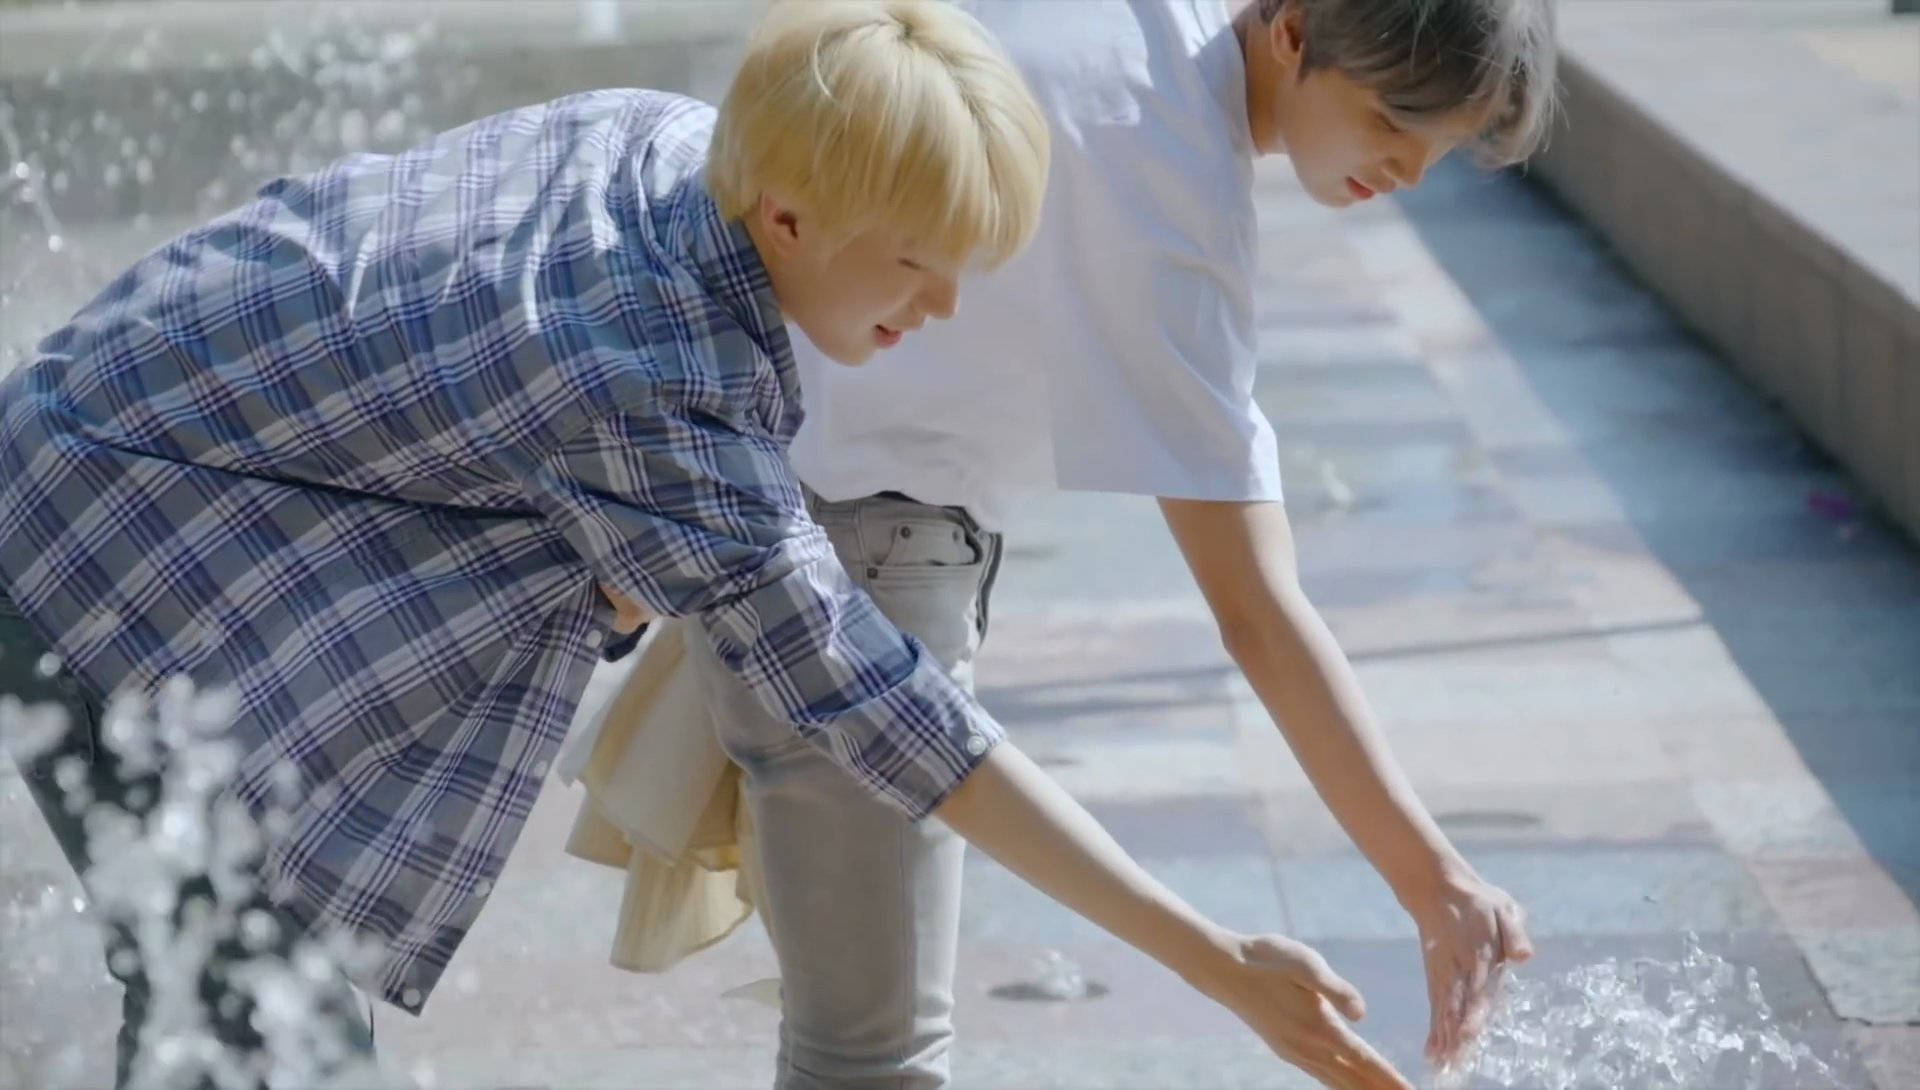 Nct 127 Jungwoo Haechan Playing With Water